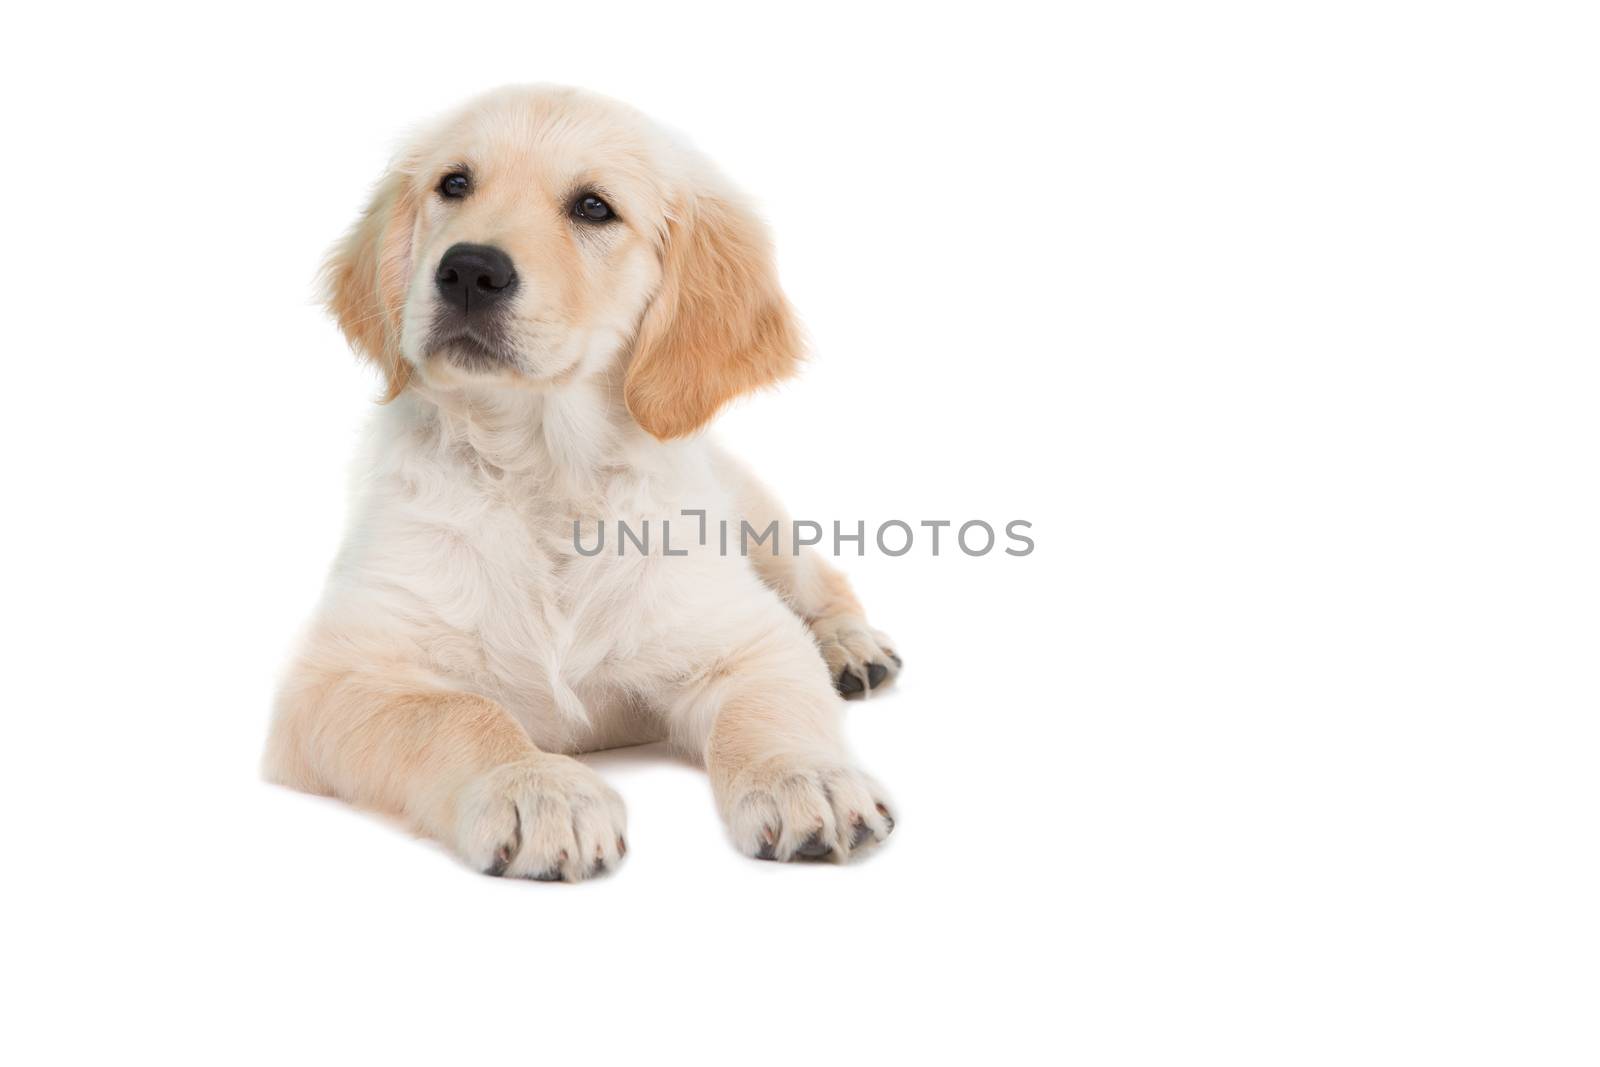 Lying dog looking to the side on white background